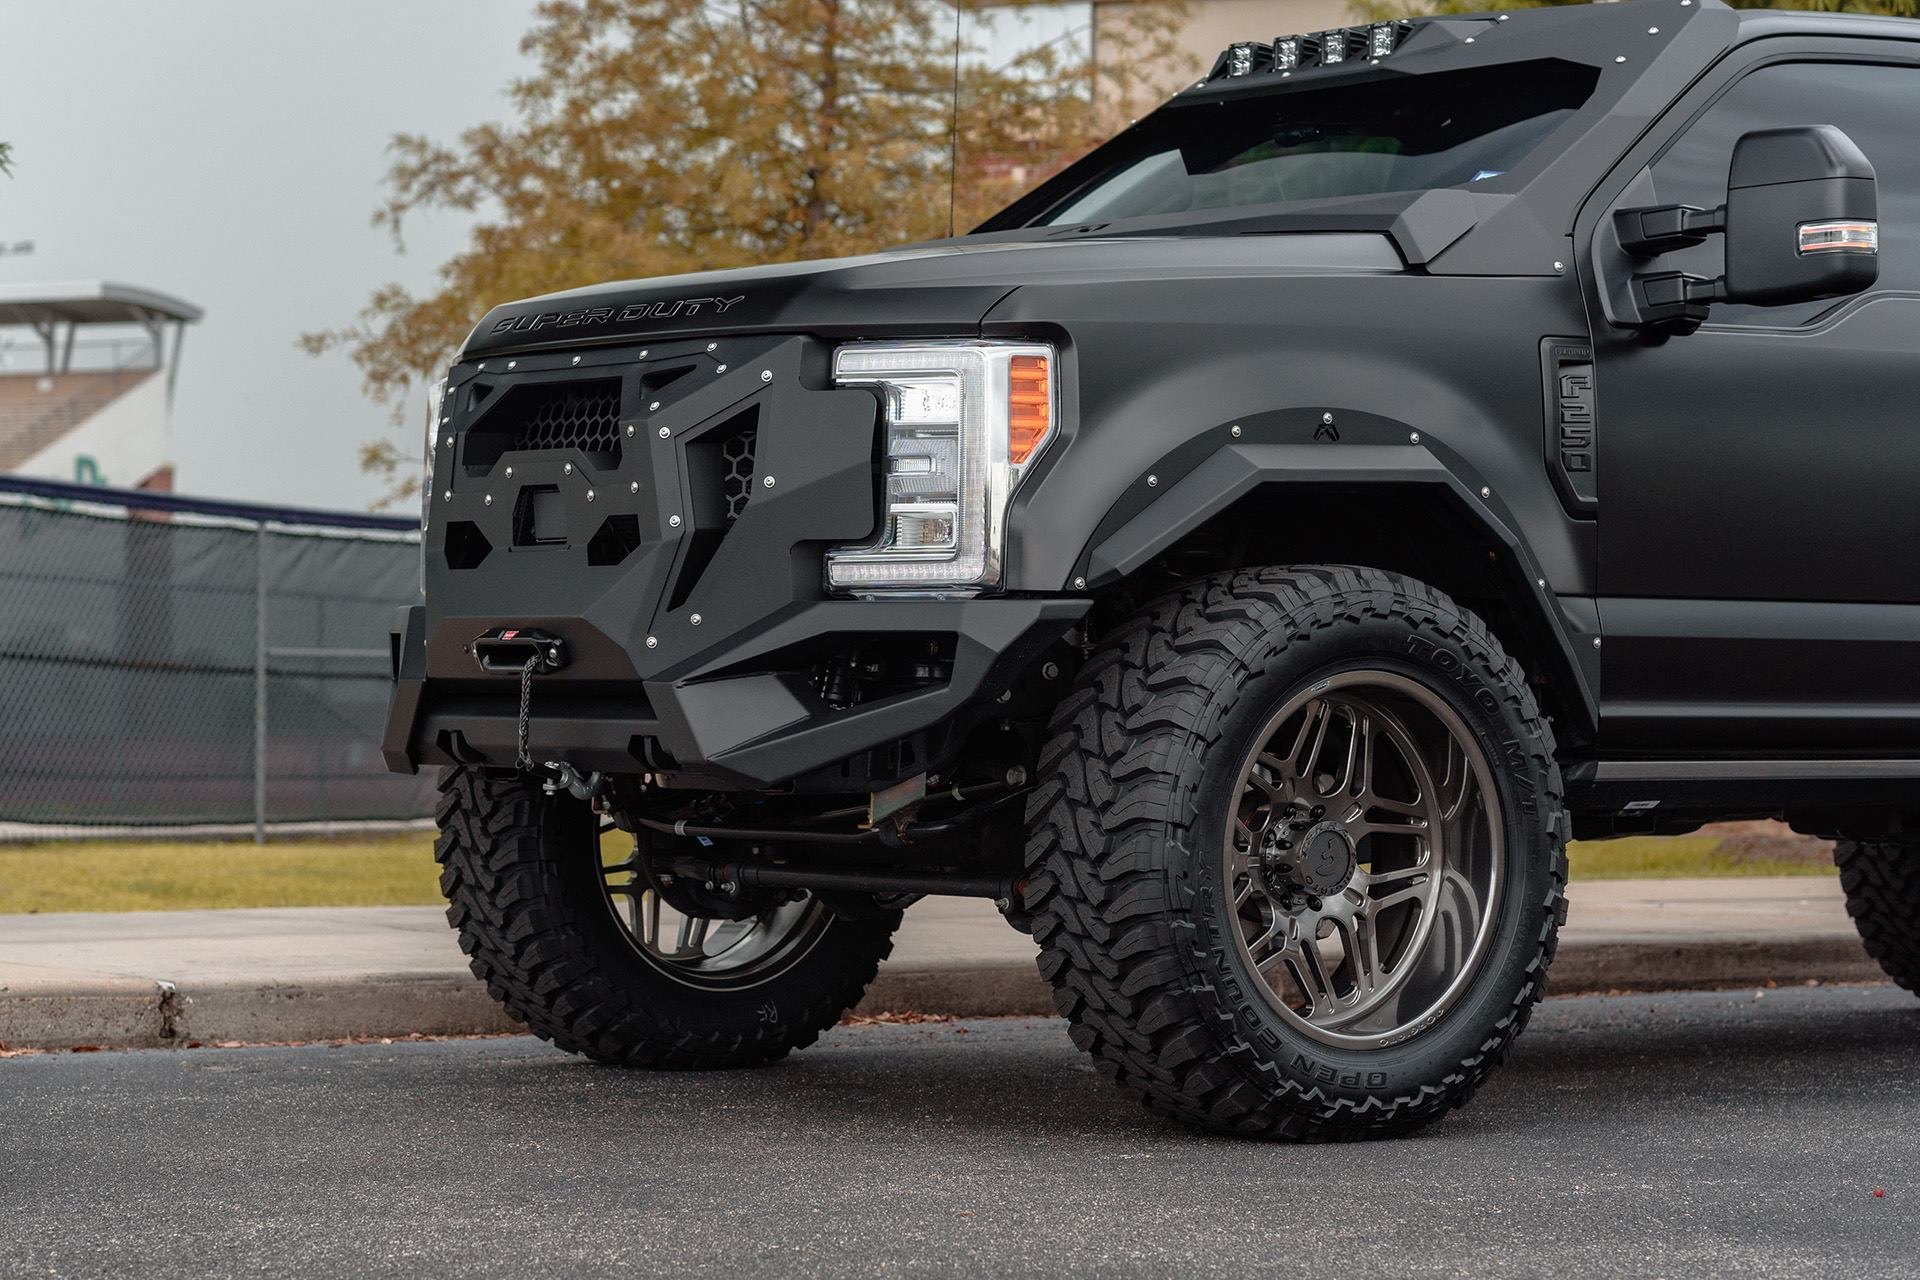 Matte Black Lifted Ford F-250 on Toyo Tires - Photo by Forgiato